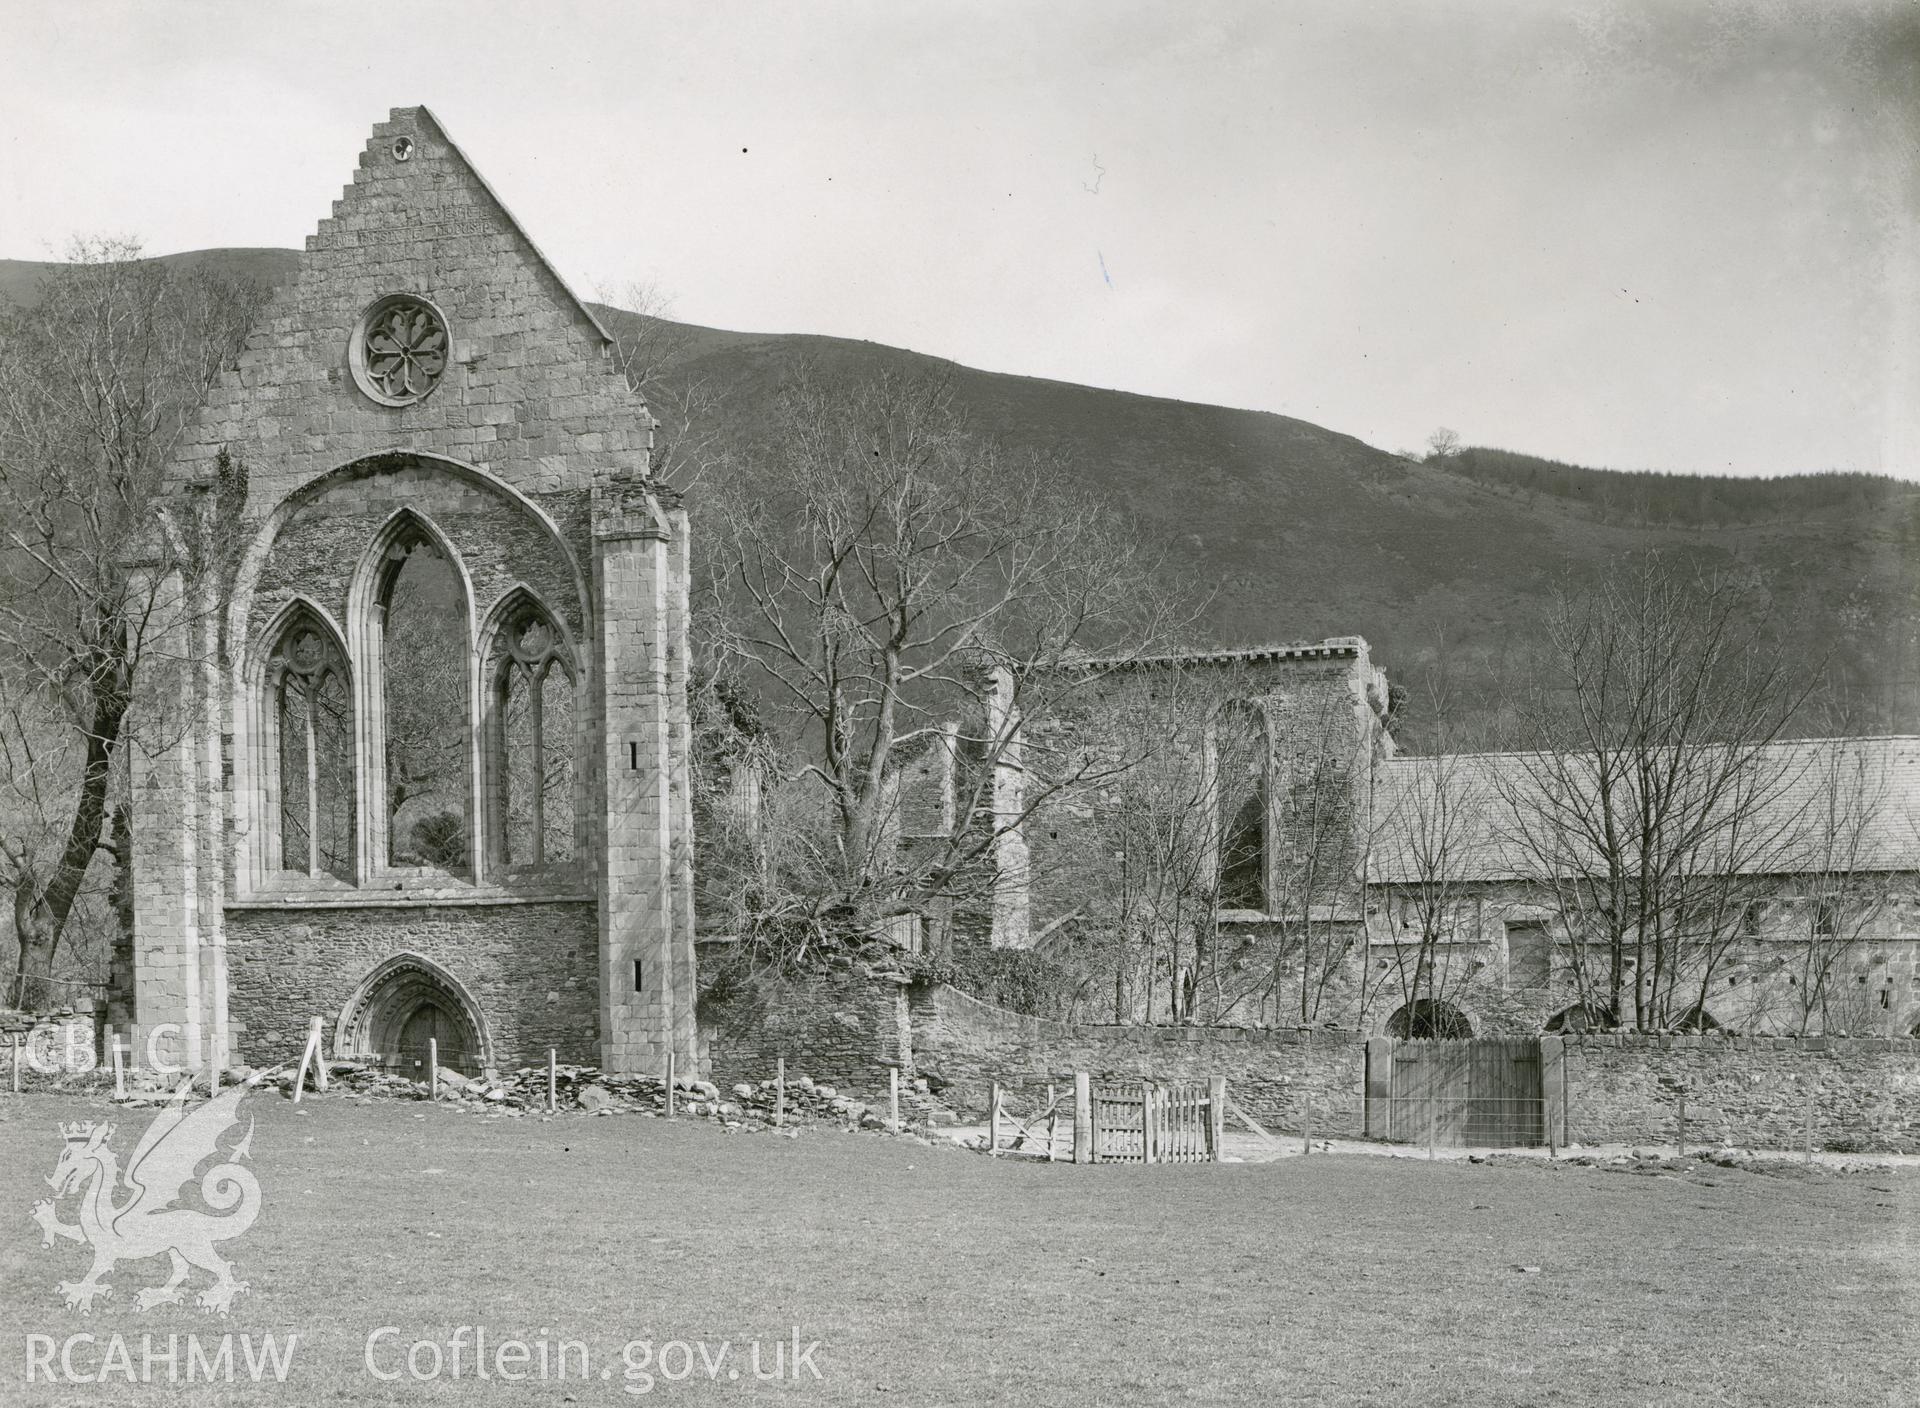 Digitised copy of a black and white photograph showing Valle Crucis Abbey from west, taken by F.H. Crossley, 1949. Copied from print as negative held by NMR England (Historic England).